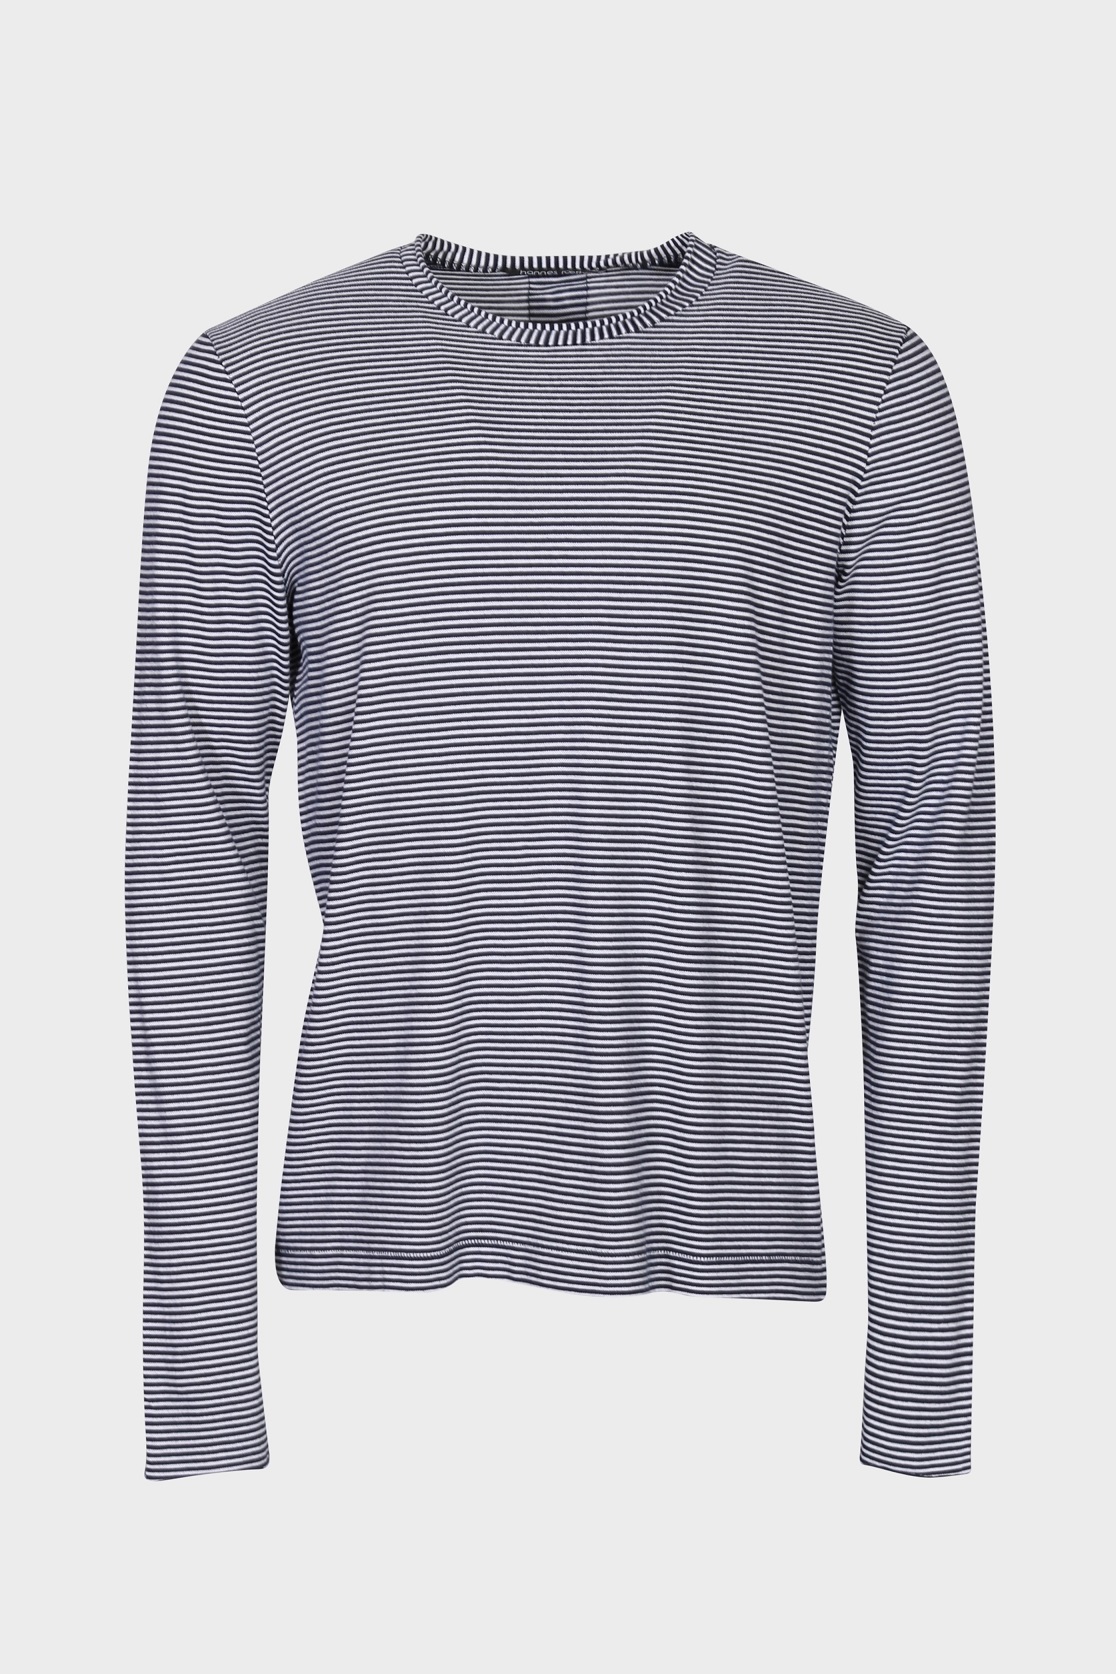 HANNES ROETHER Longsleeve in Navy/White Stripes S